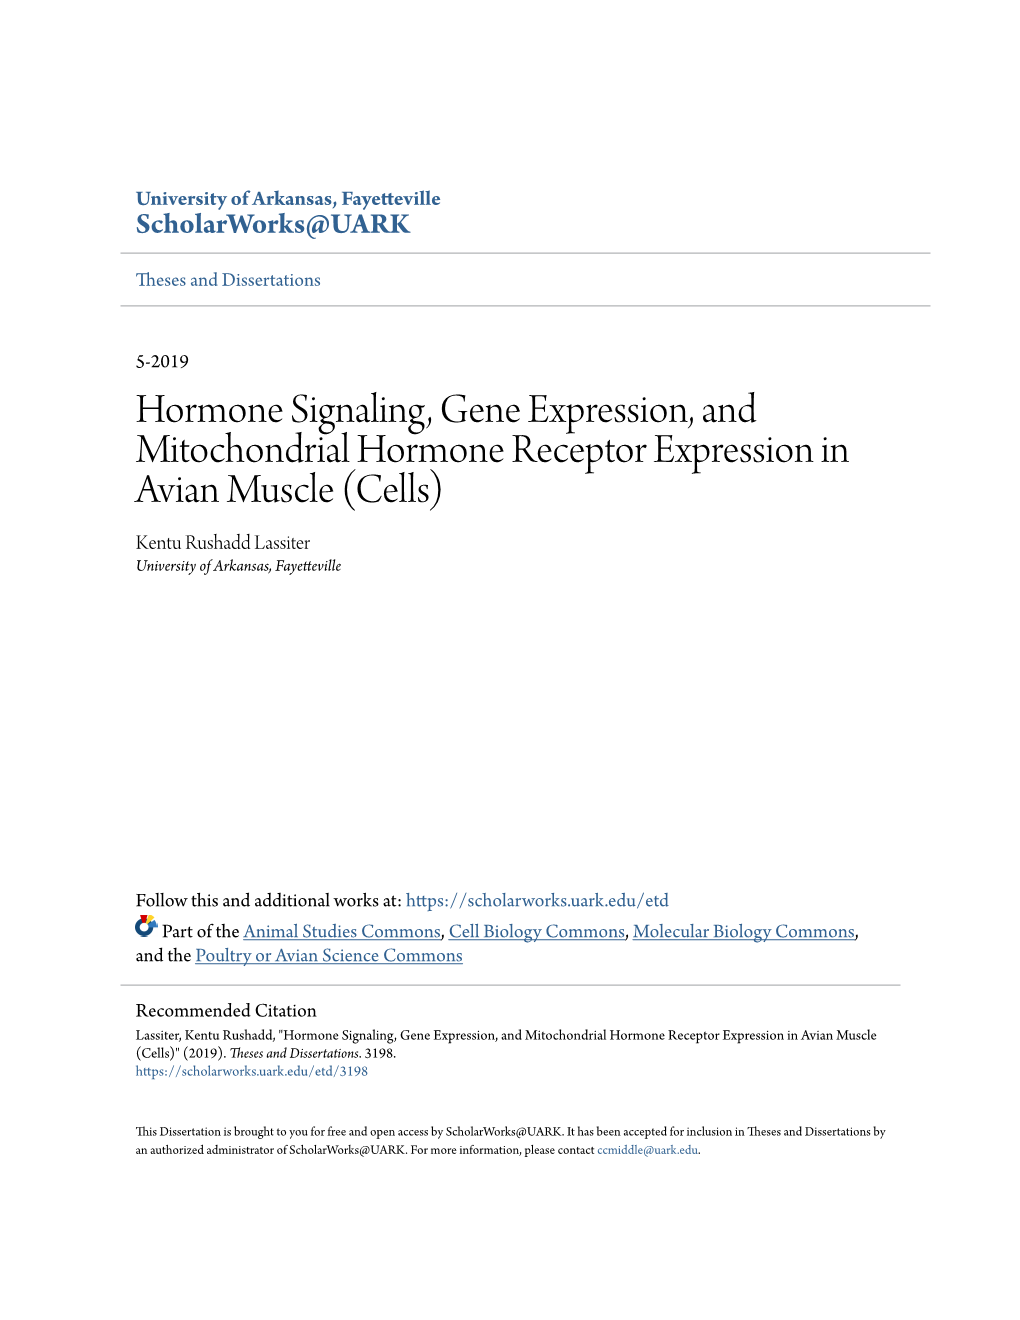 Hormone Signaling, Gene Expression, and Mitochondrial Hormone Receptor Expression in Avian Muscle (Cells) Kentu Rushadd Lassiter University of Arkansas, Fayetteville